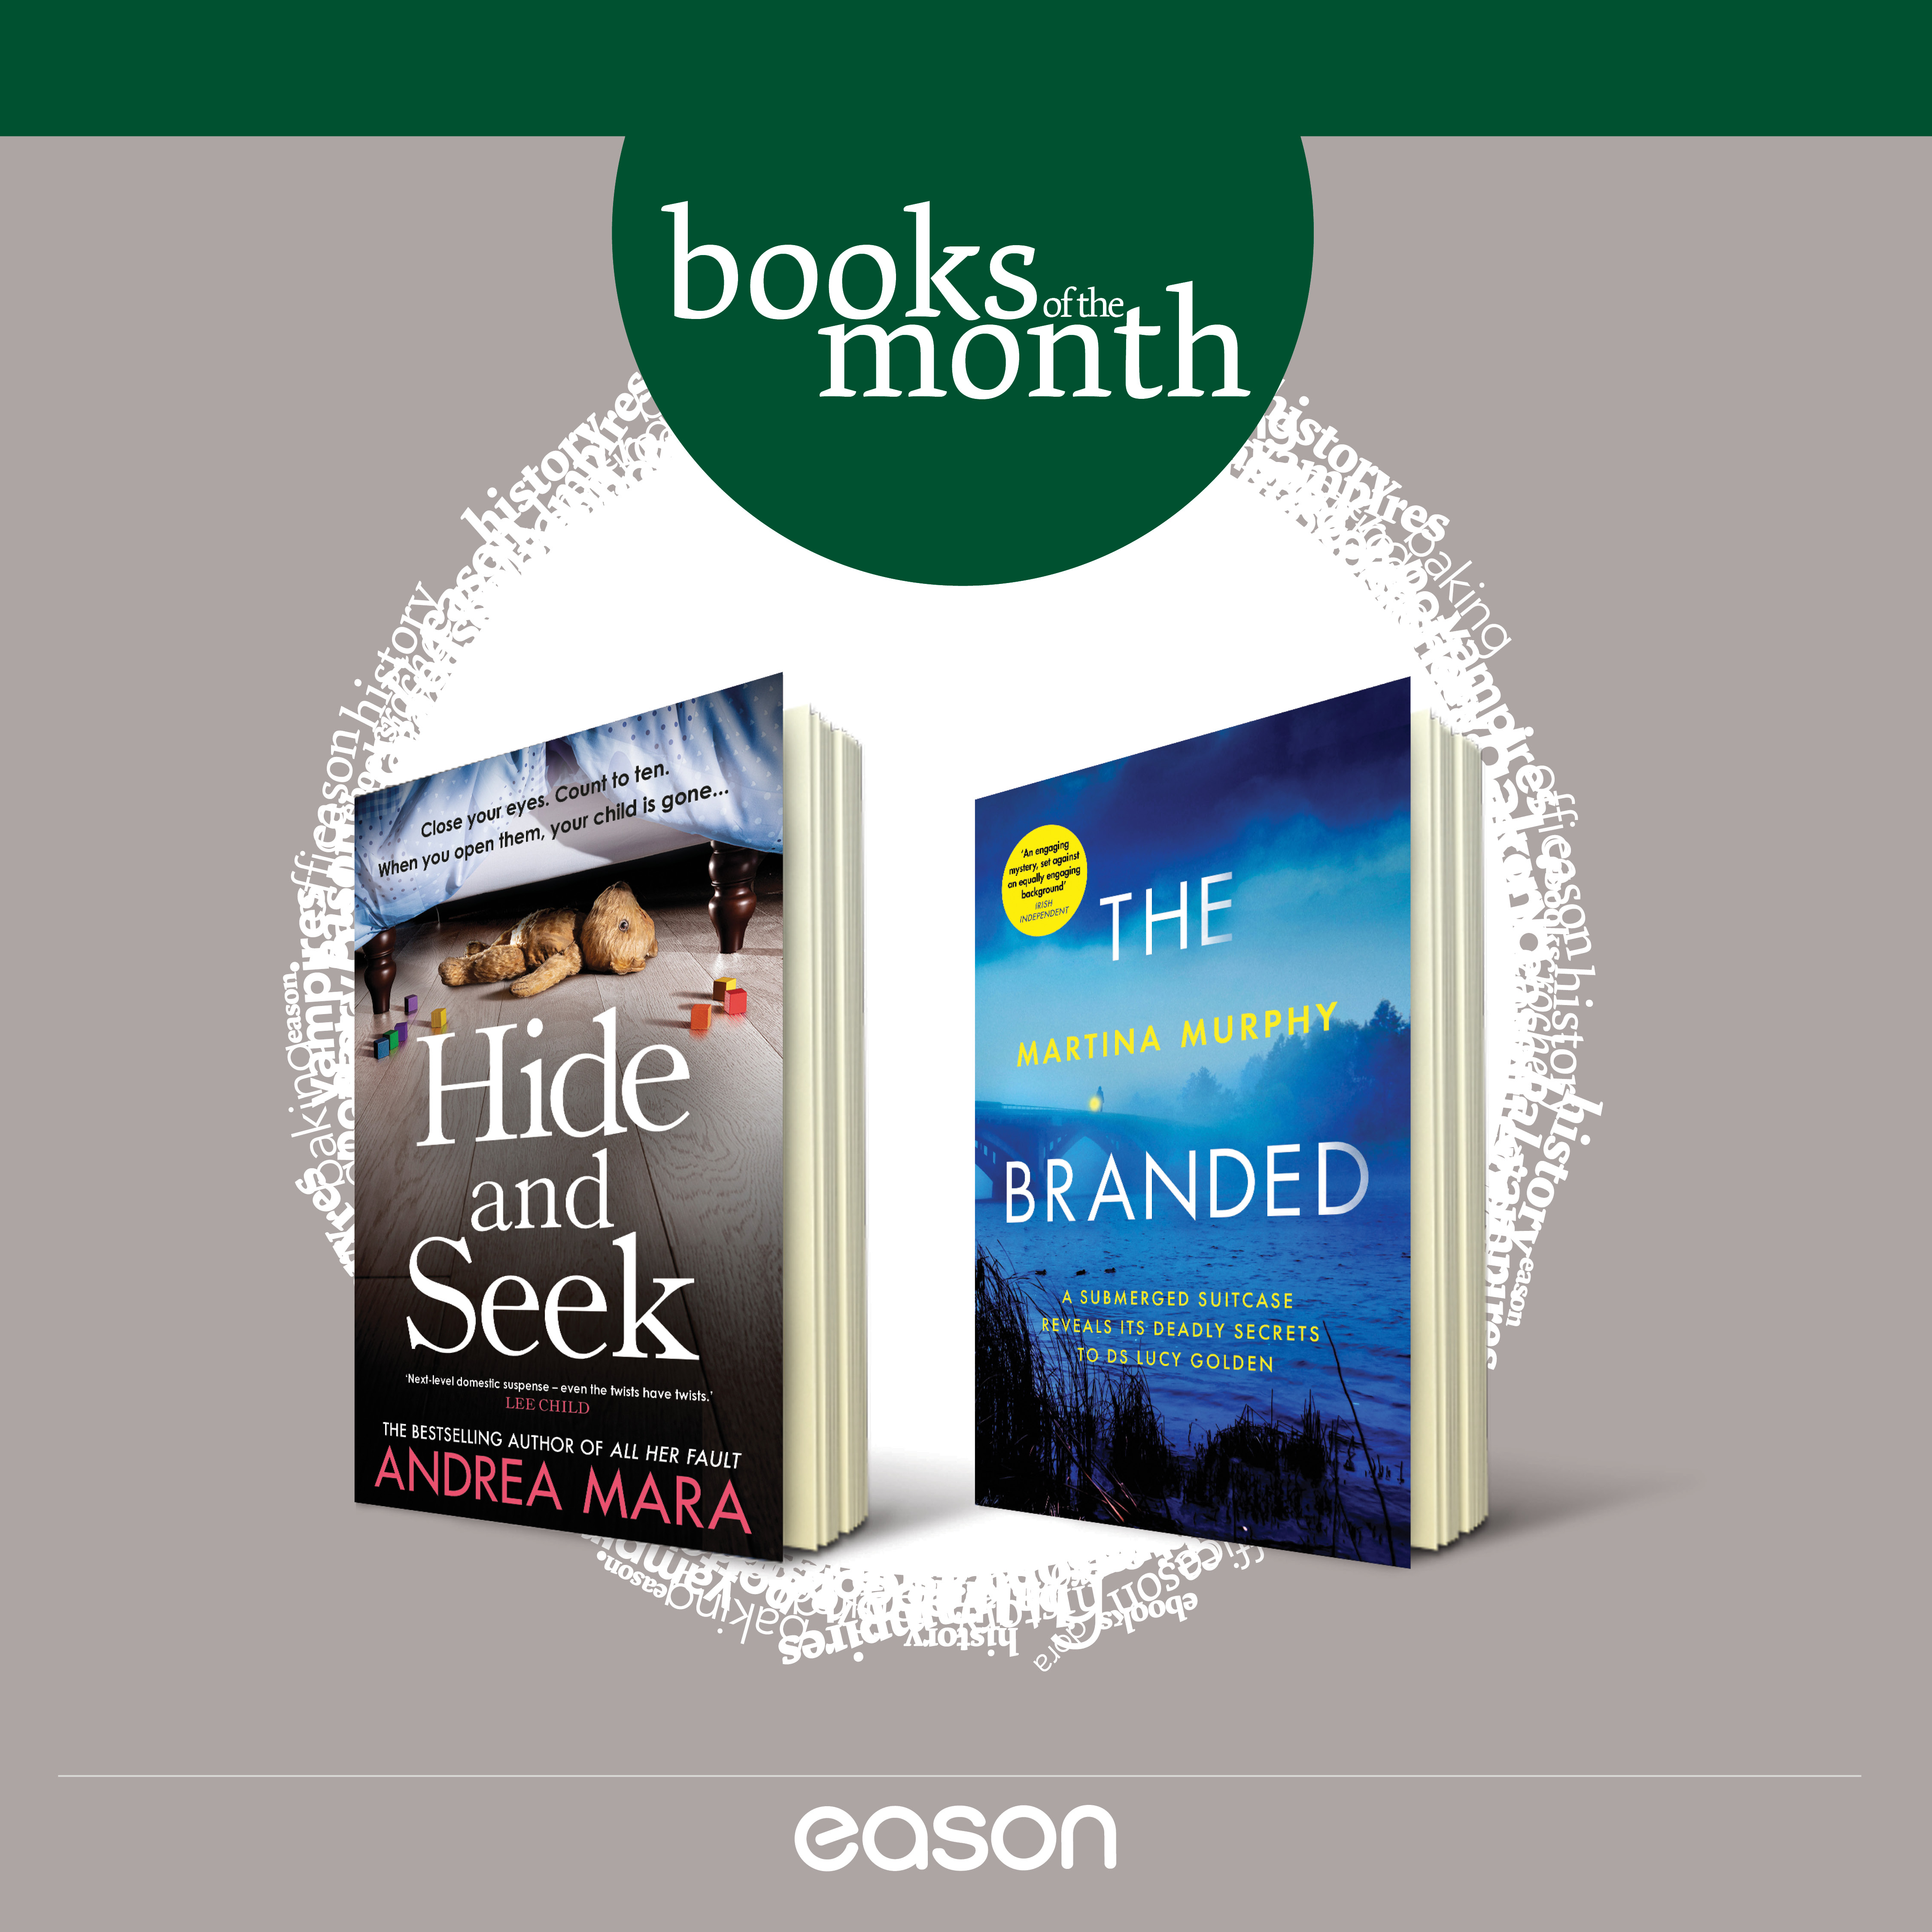 Books of the month at Eason